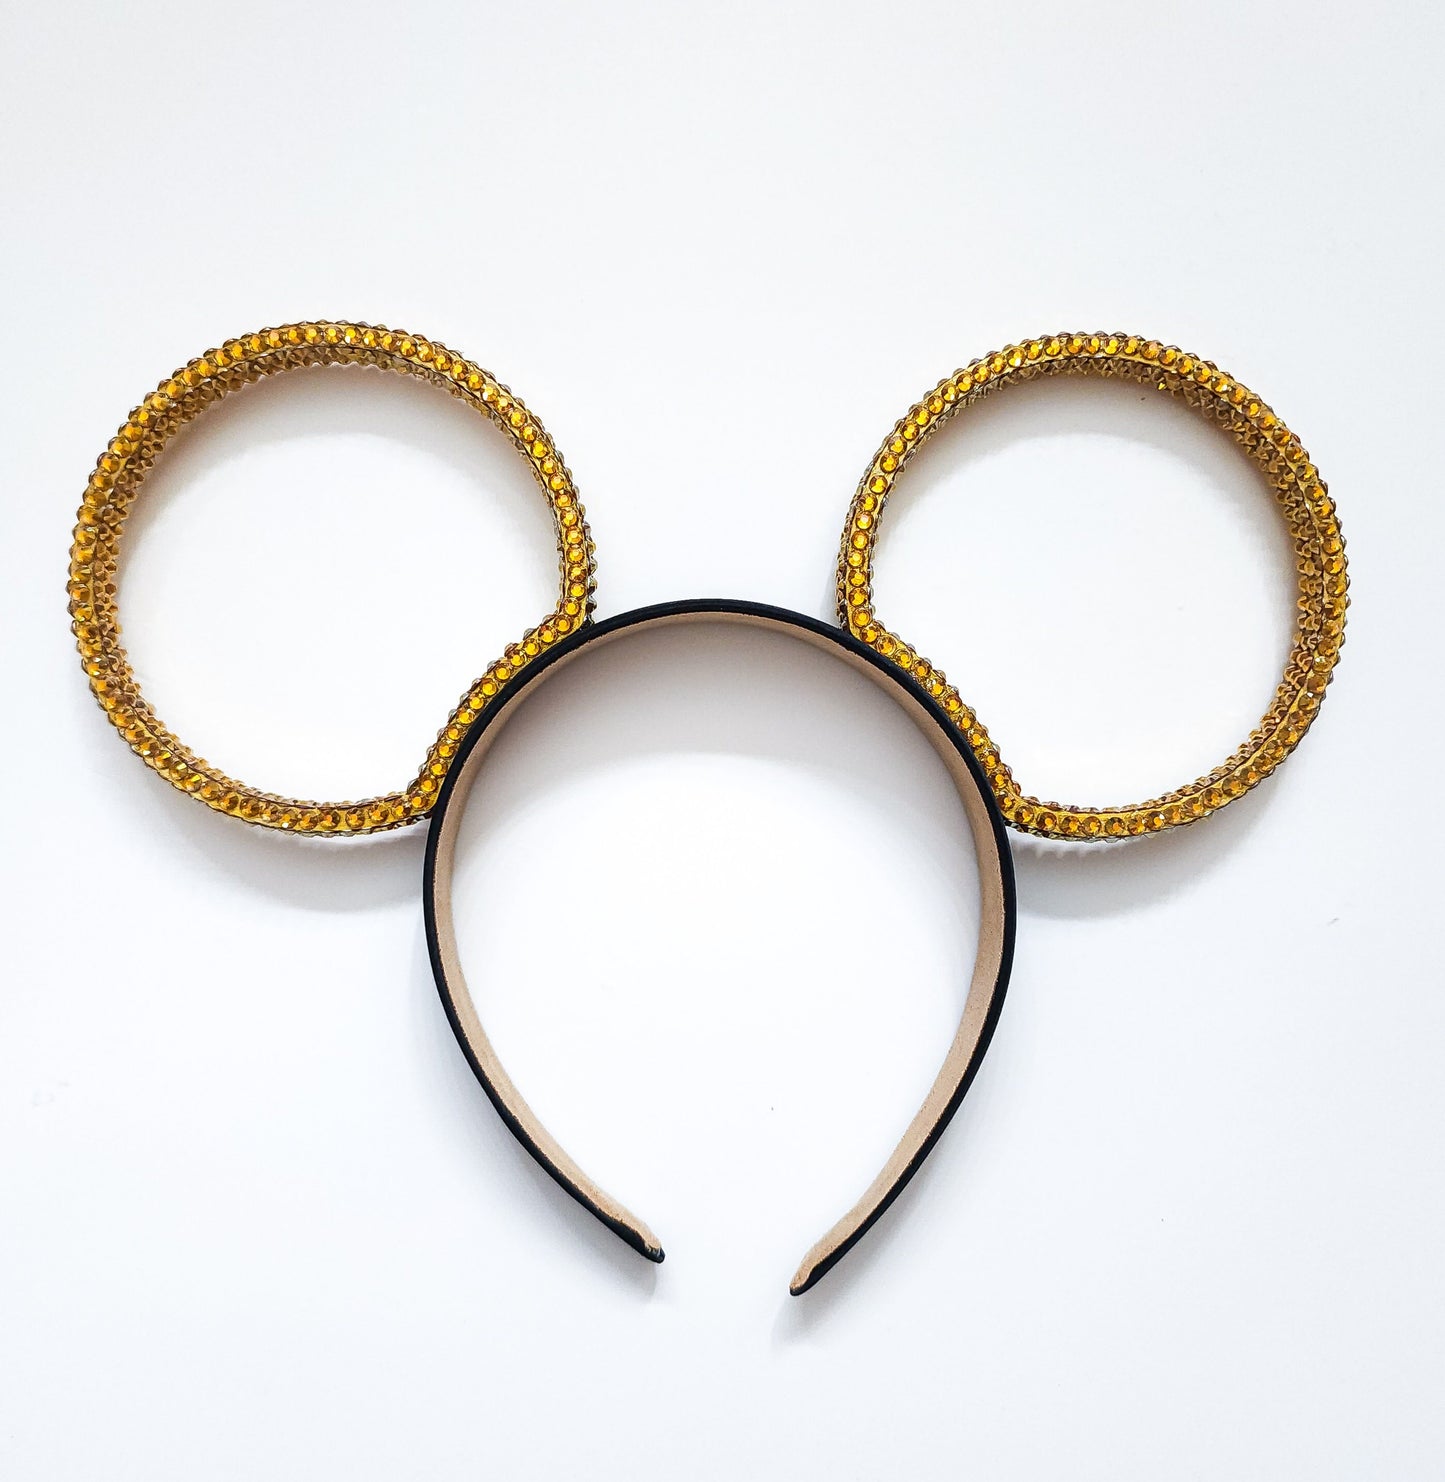 Magic Mountain ears ORIGINAL design-GOLD Rhinestone rings 3D Mouse Ears all sides covered with high quality rhinestones